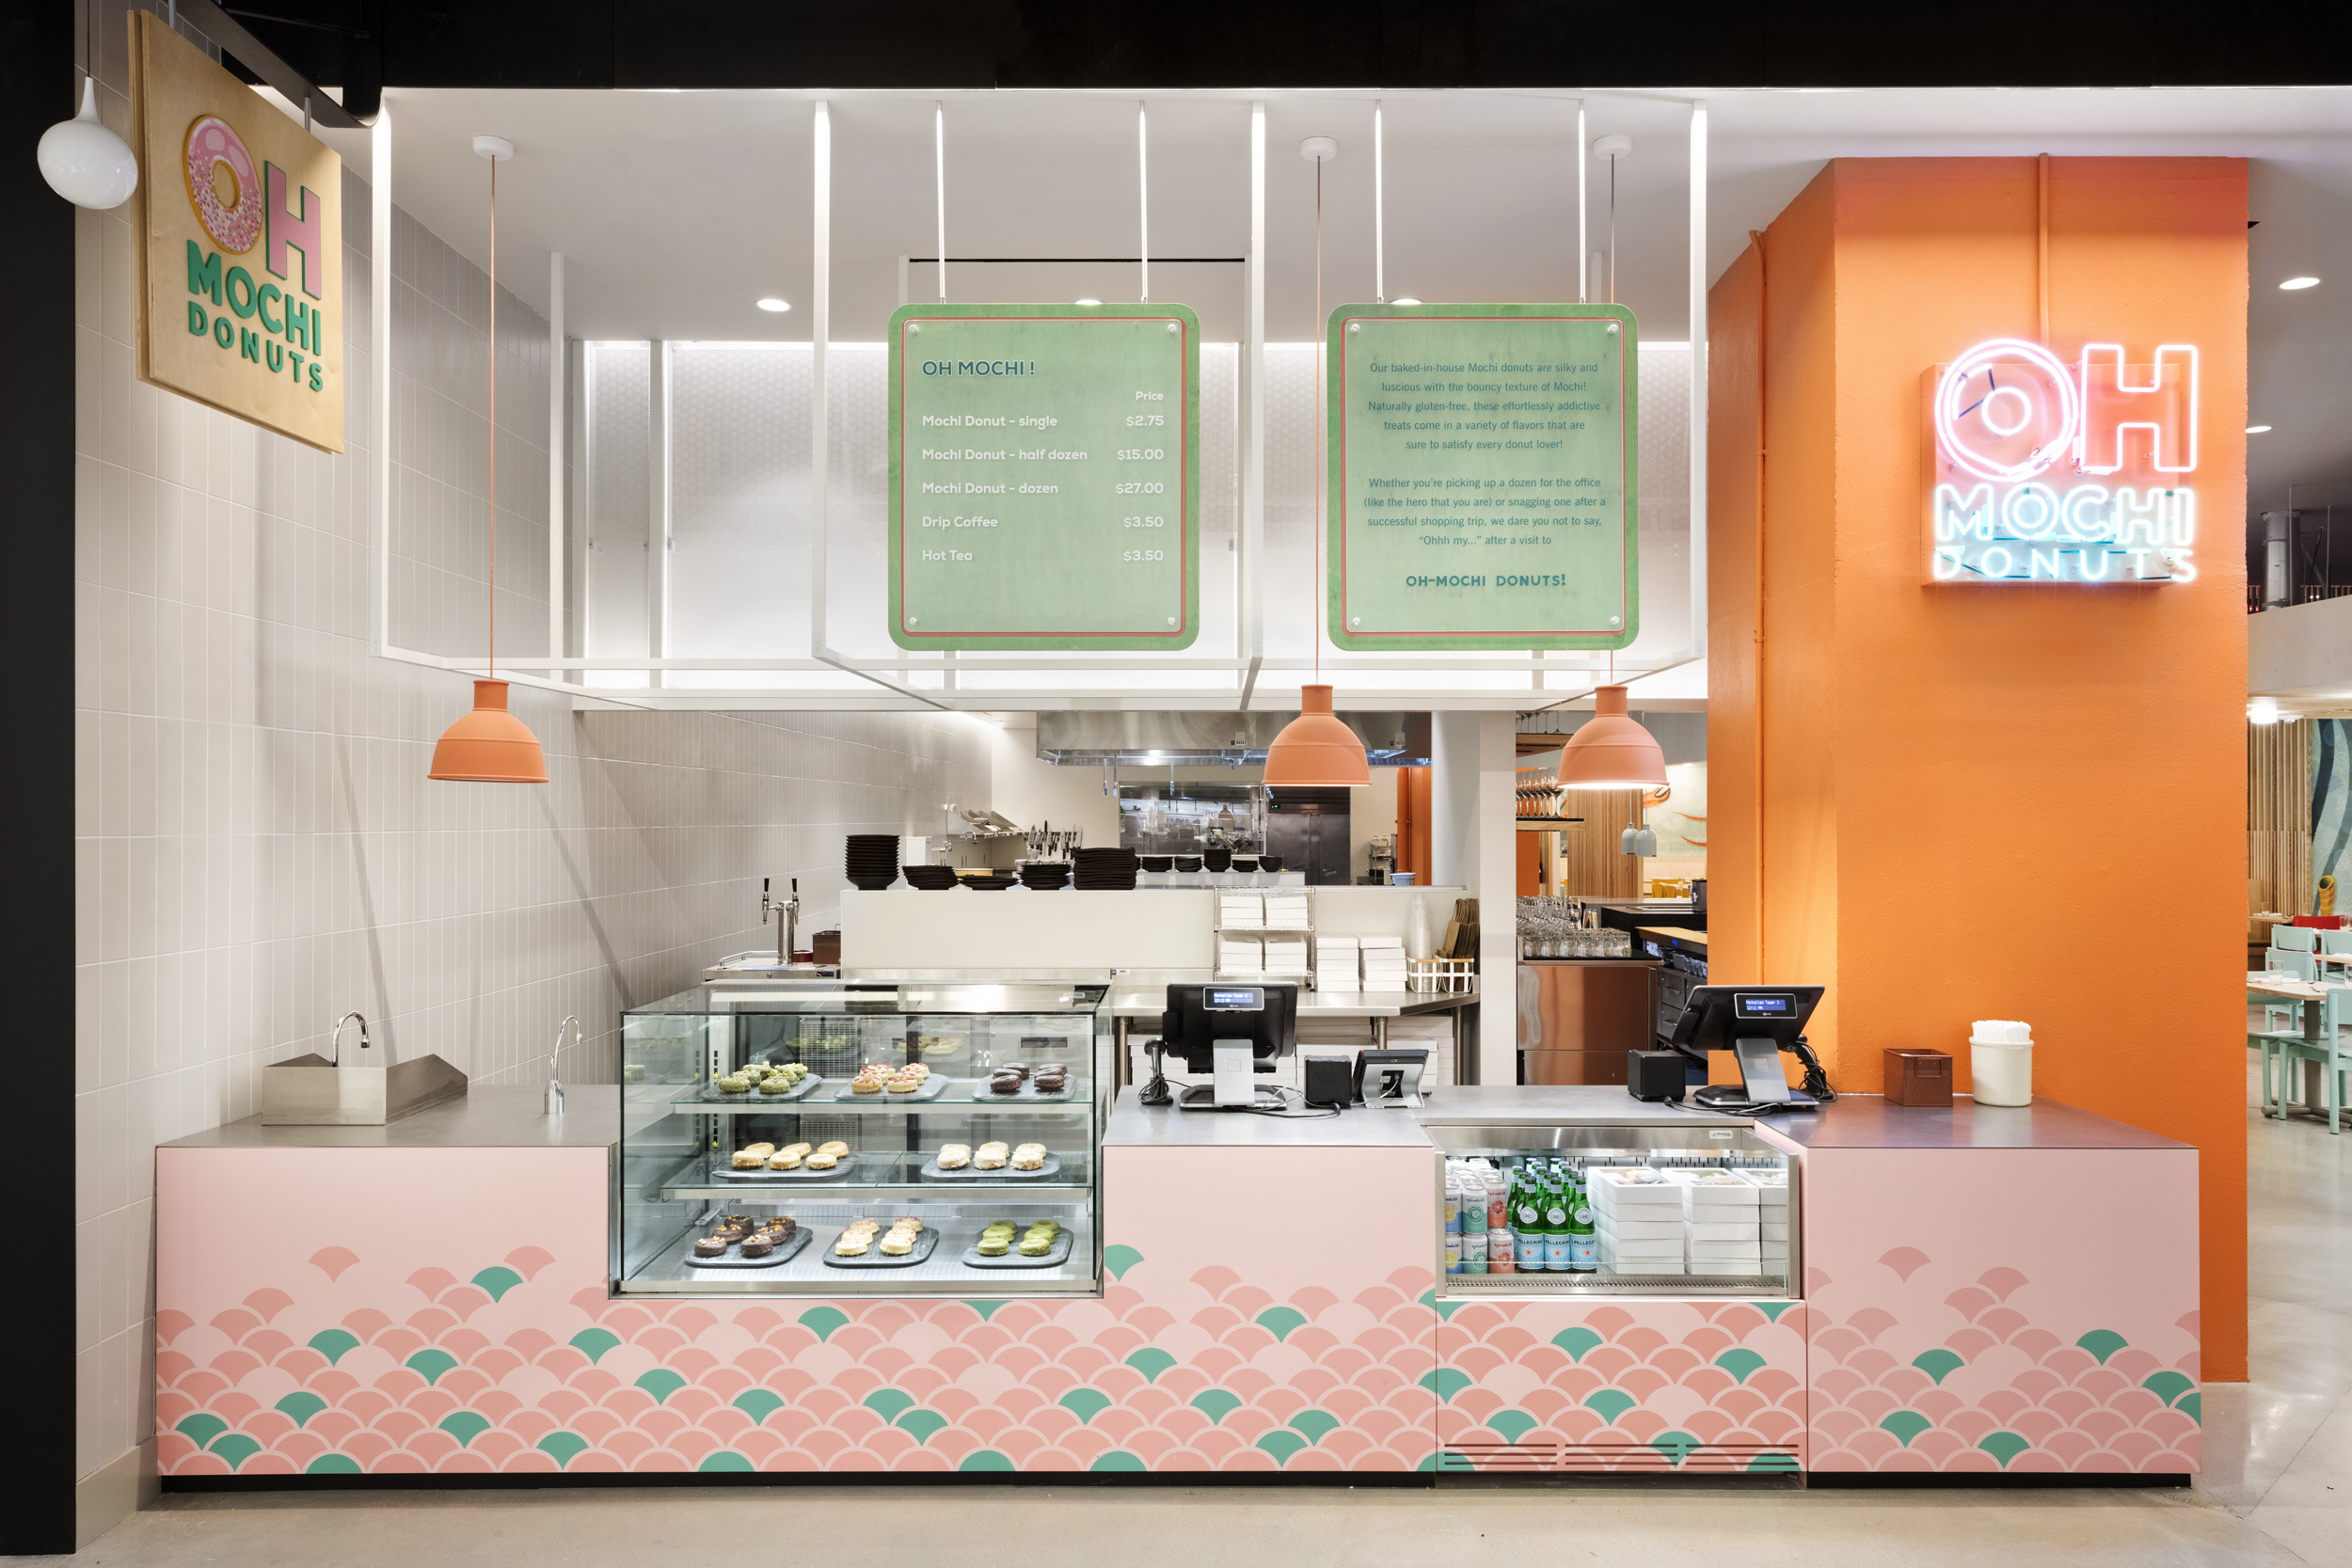 Nordstrom's NYC Flagship Features Pop-Ups and Uncommon Jewelry Brands – JCK